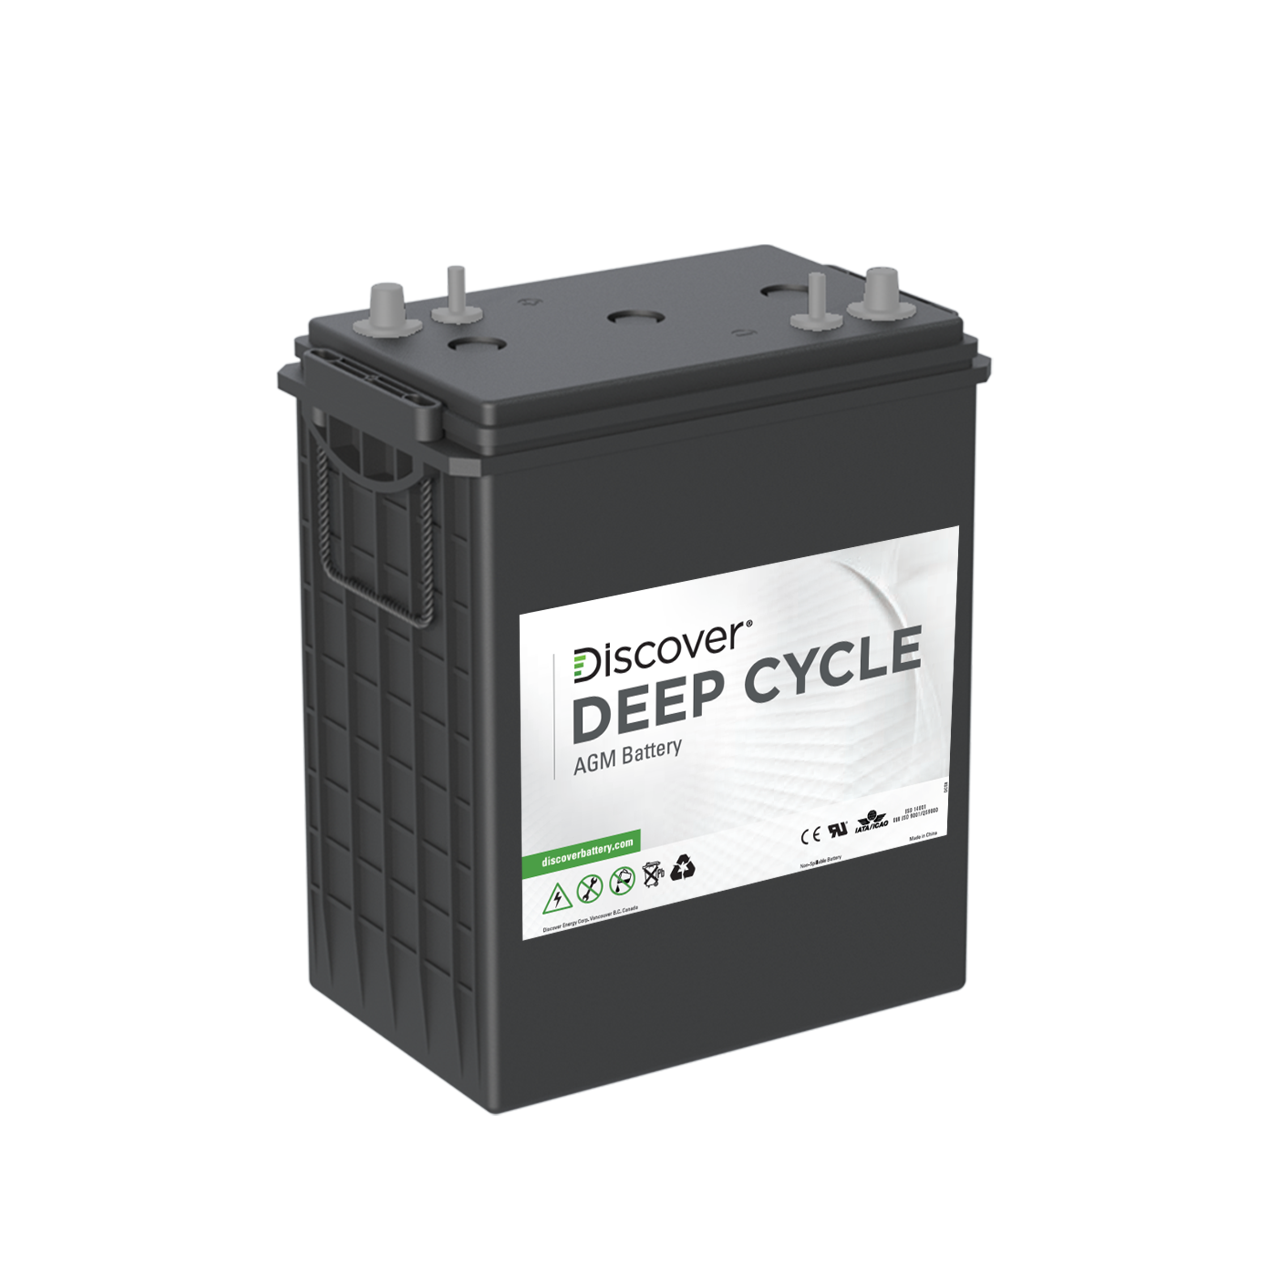 AGM Mobile Deep Cycle Batteries